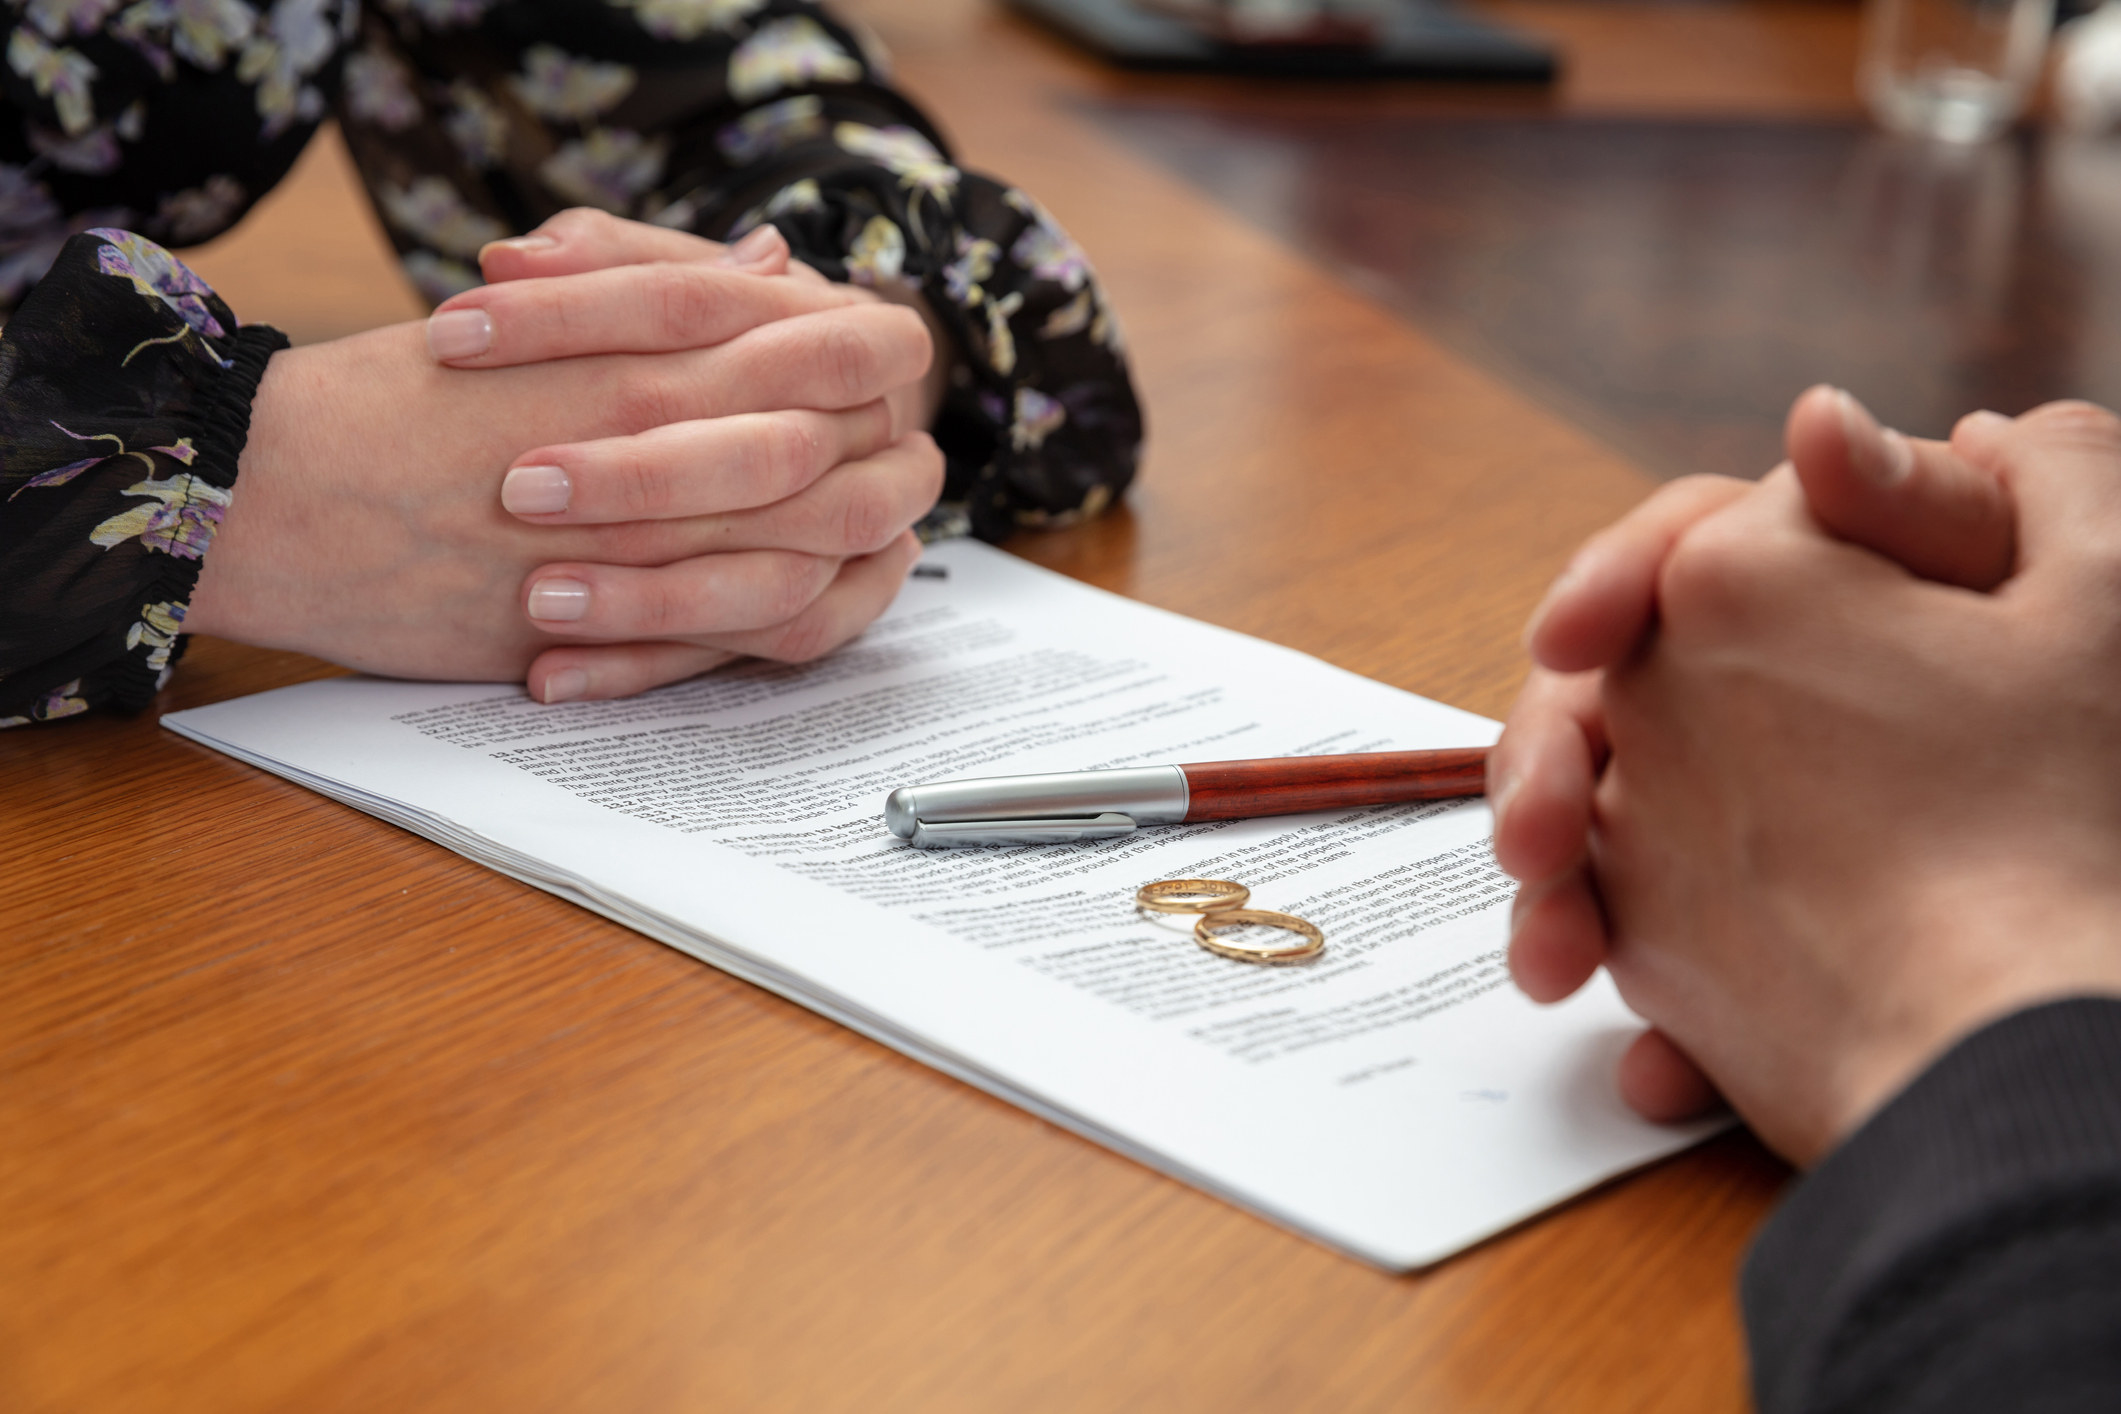 Two people&#x27;s hands next to papers with wedding rings and a pen on top